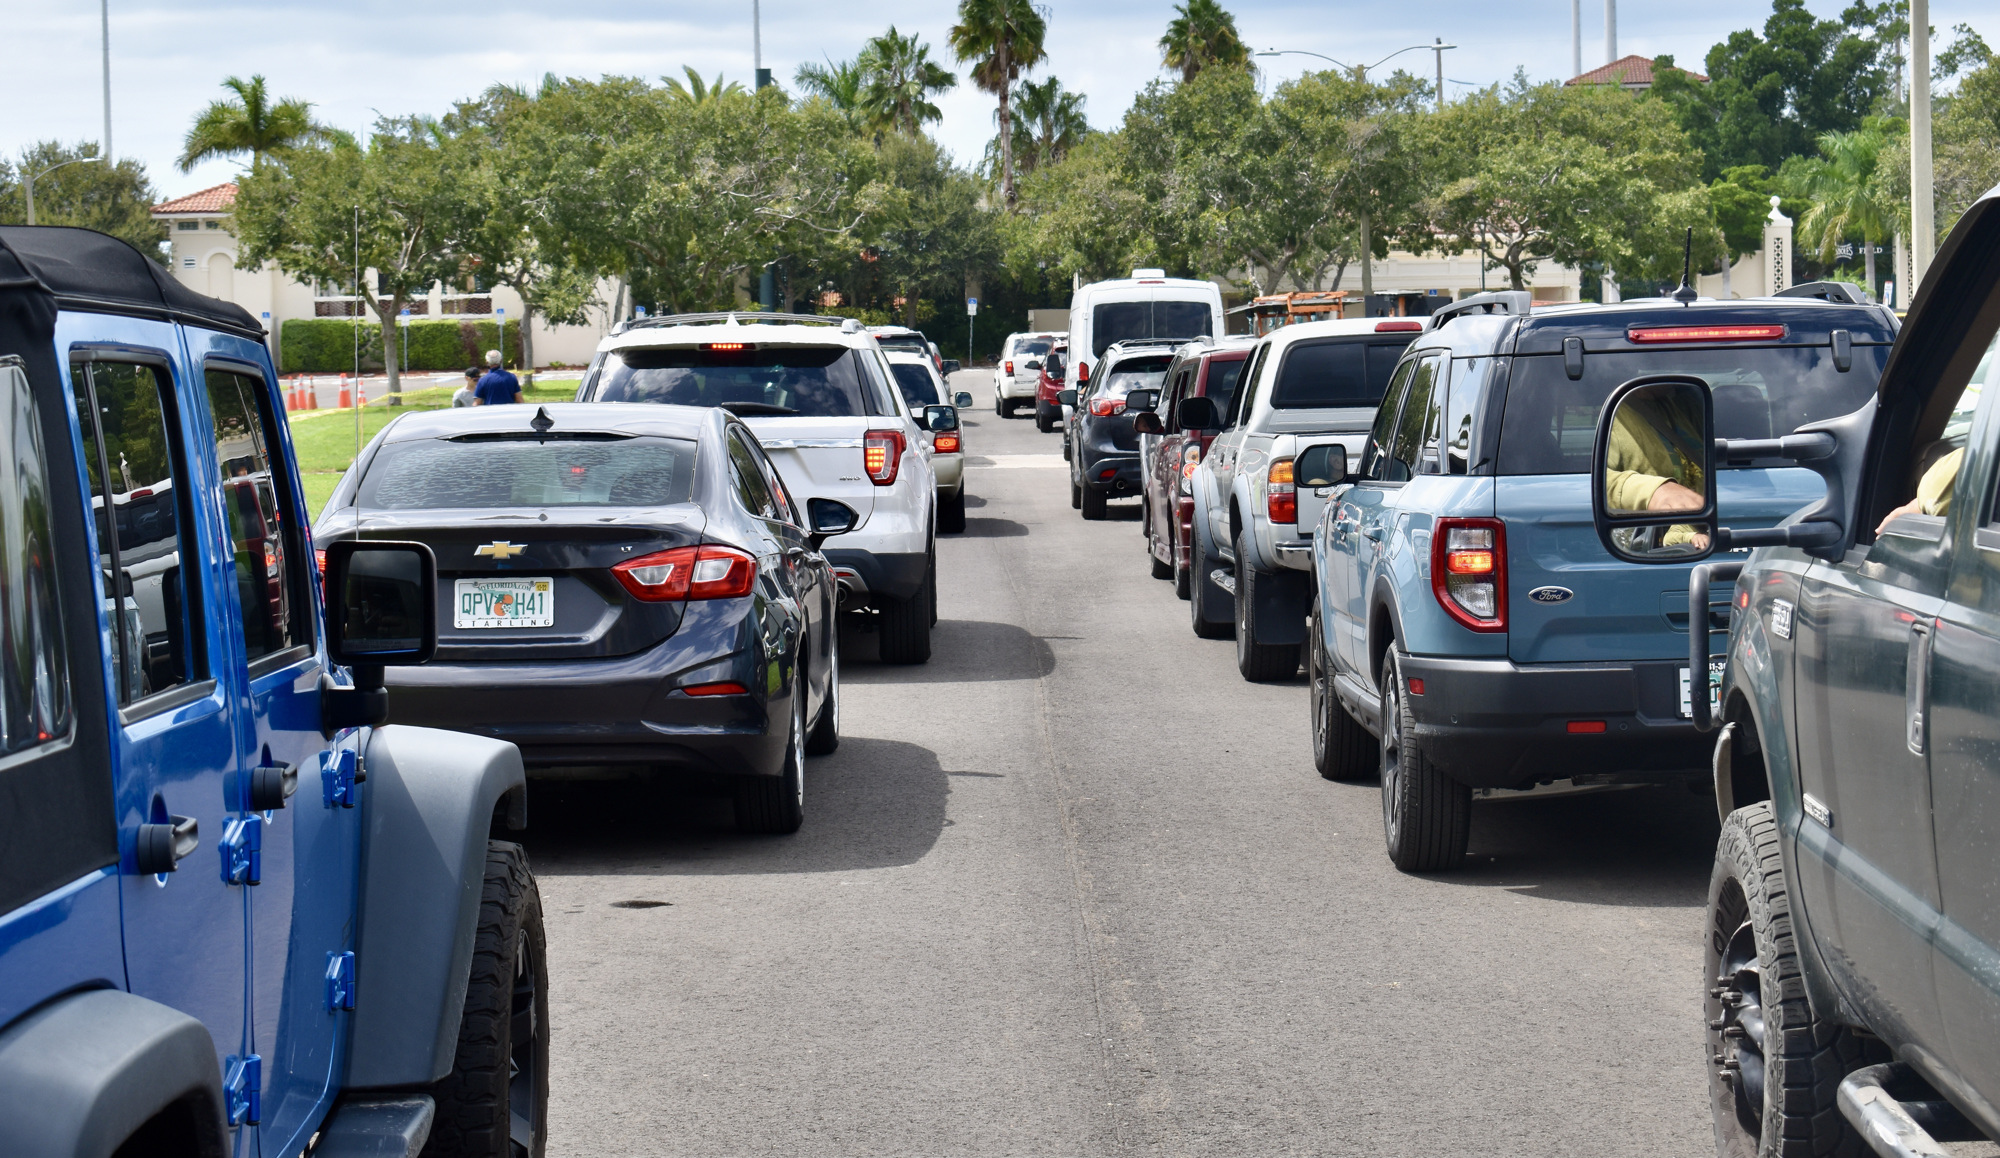 Cars and trucks line up in the parking lot of Ed Smith Stadium on Sunday for sandbag distribution.